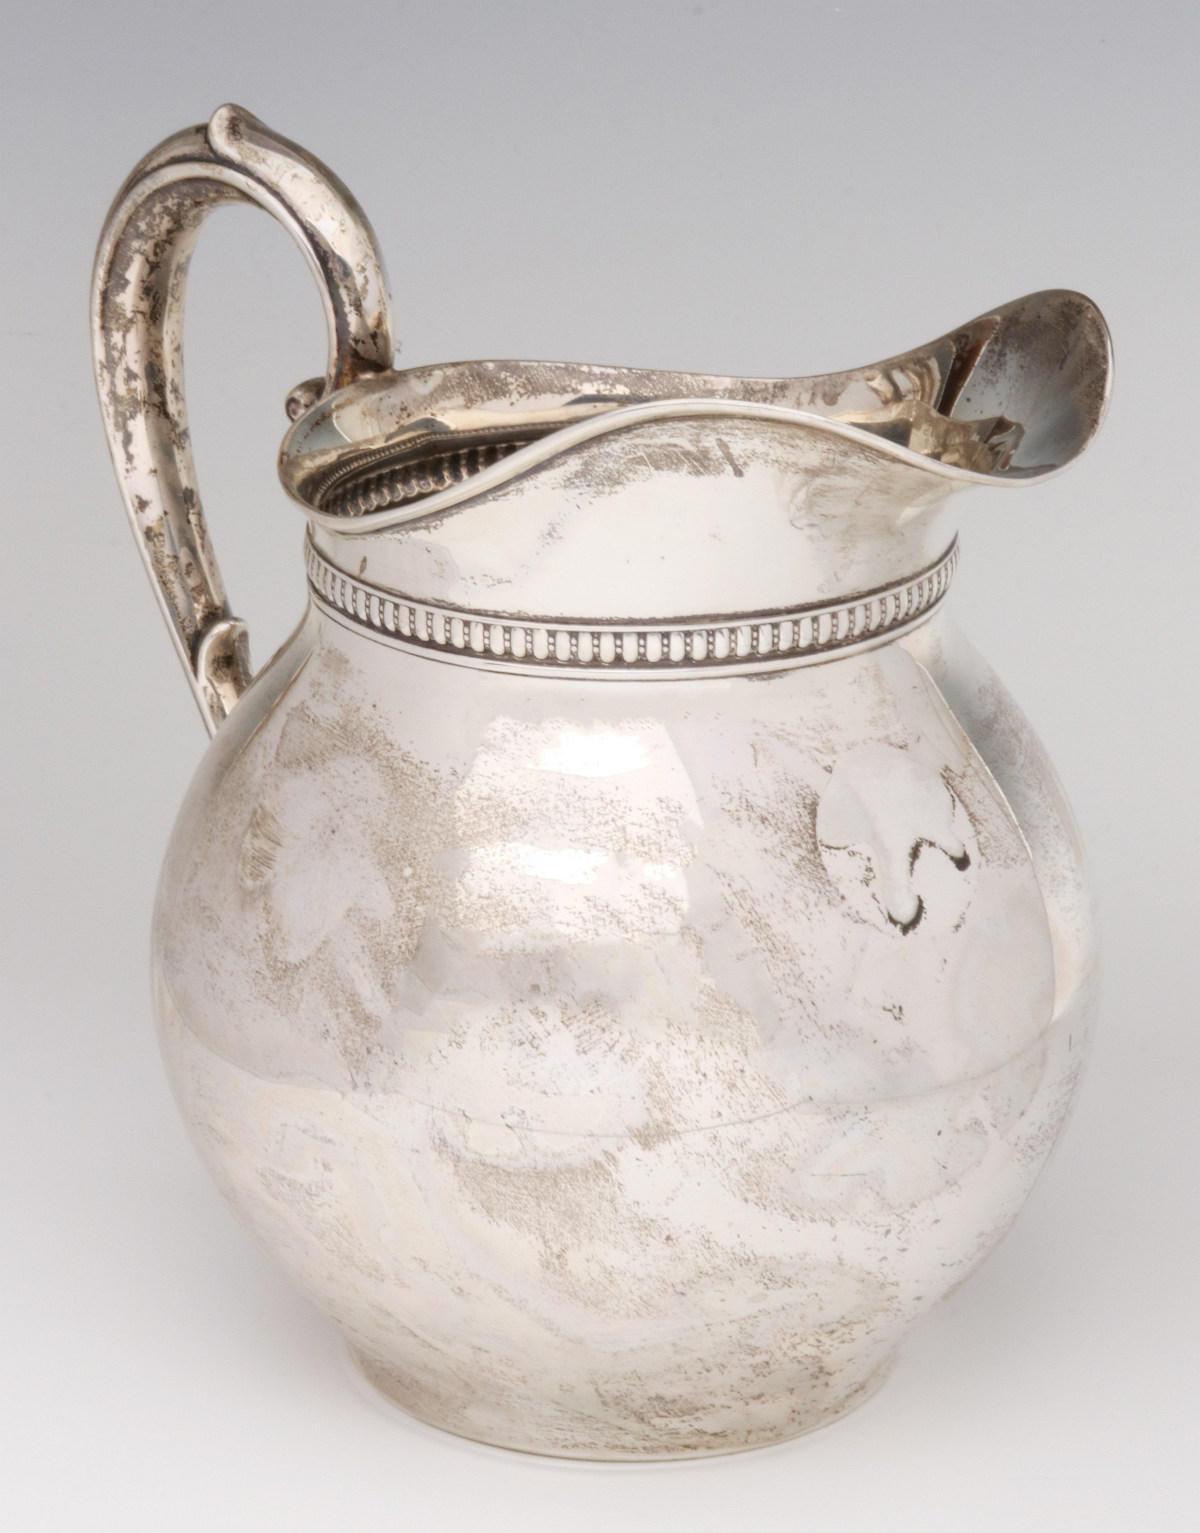 A WALLACE STERLING WATER PITCHER